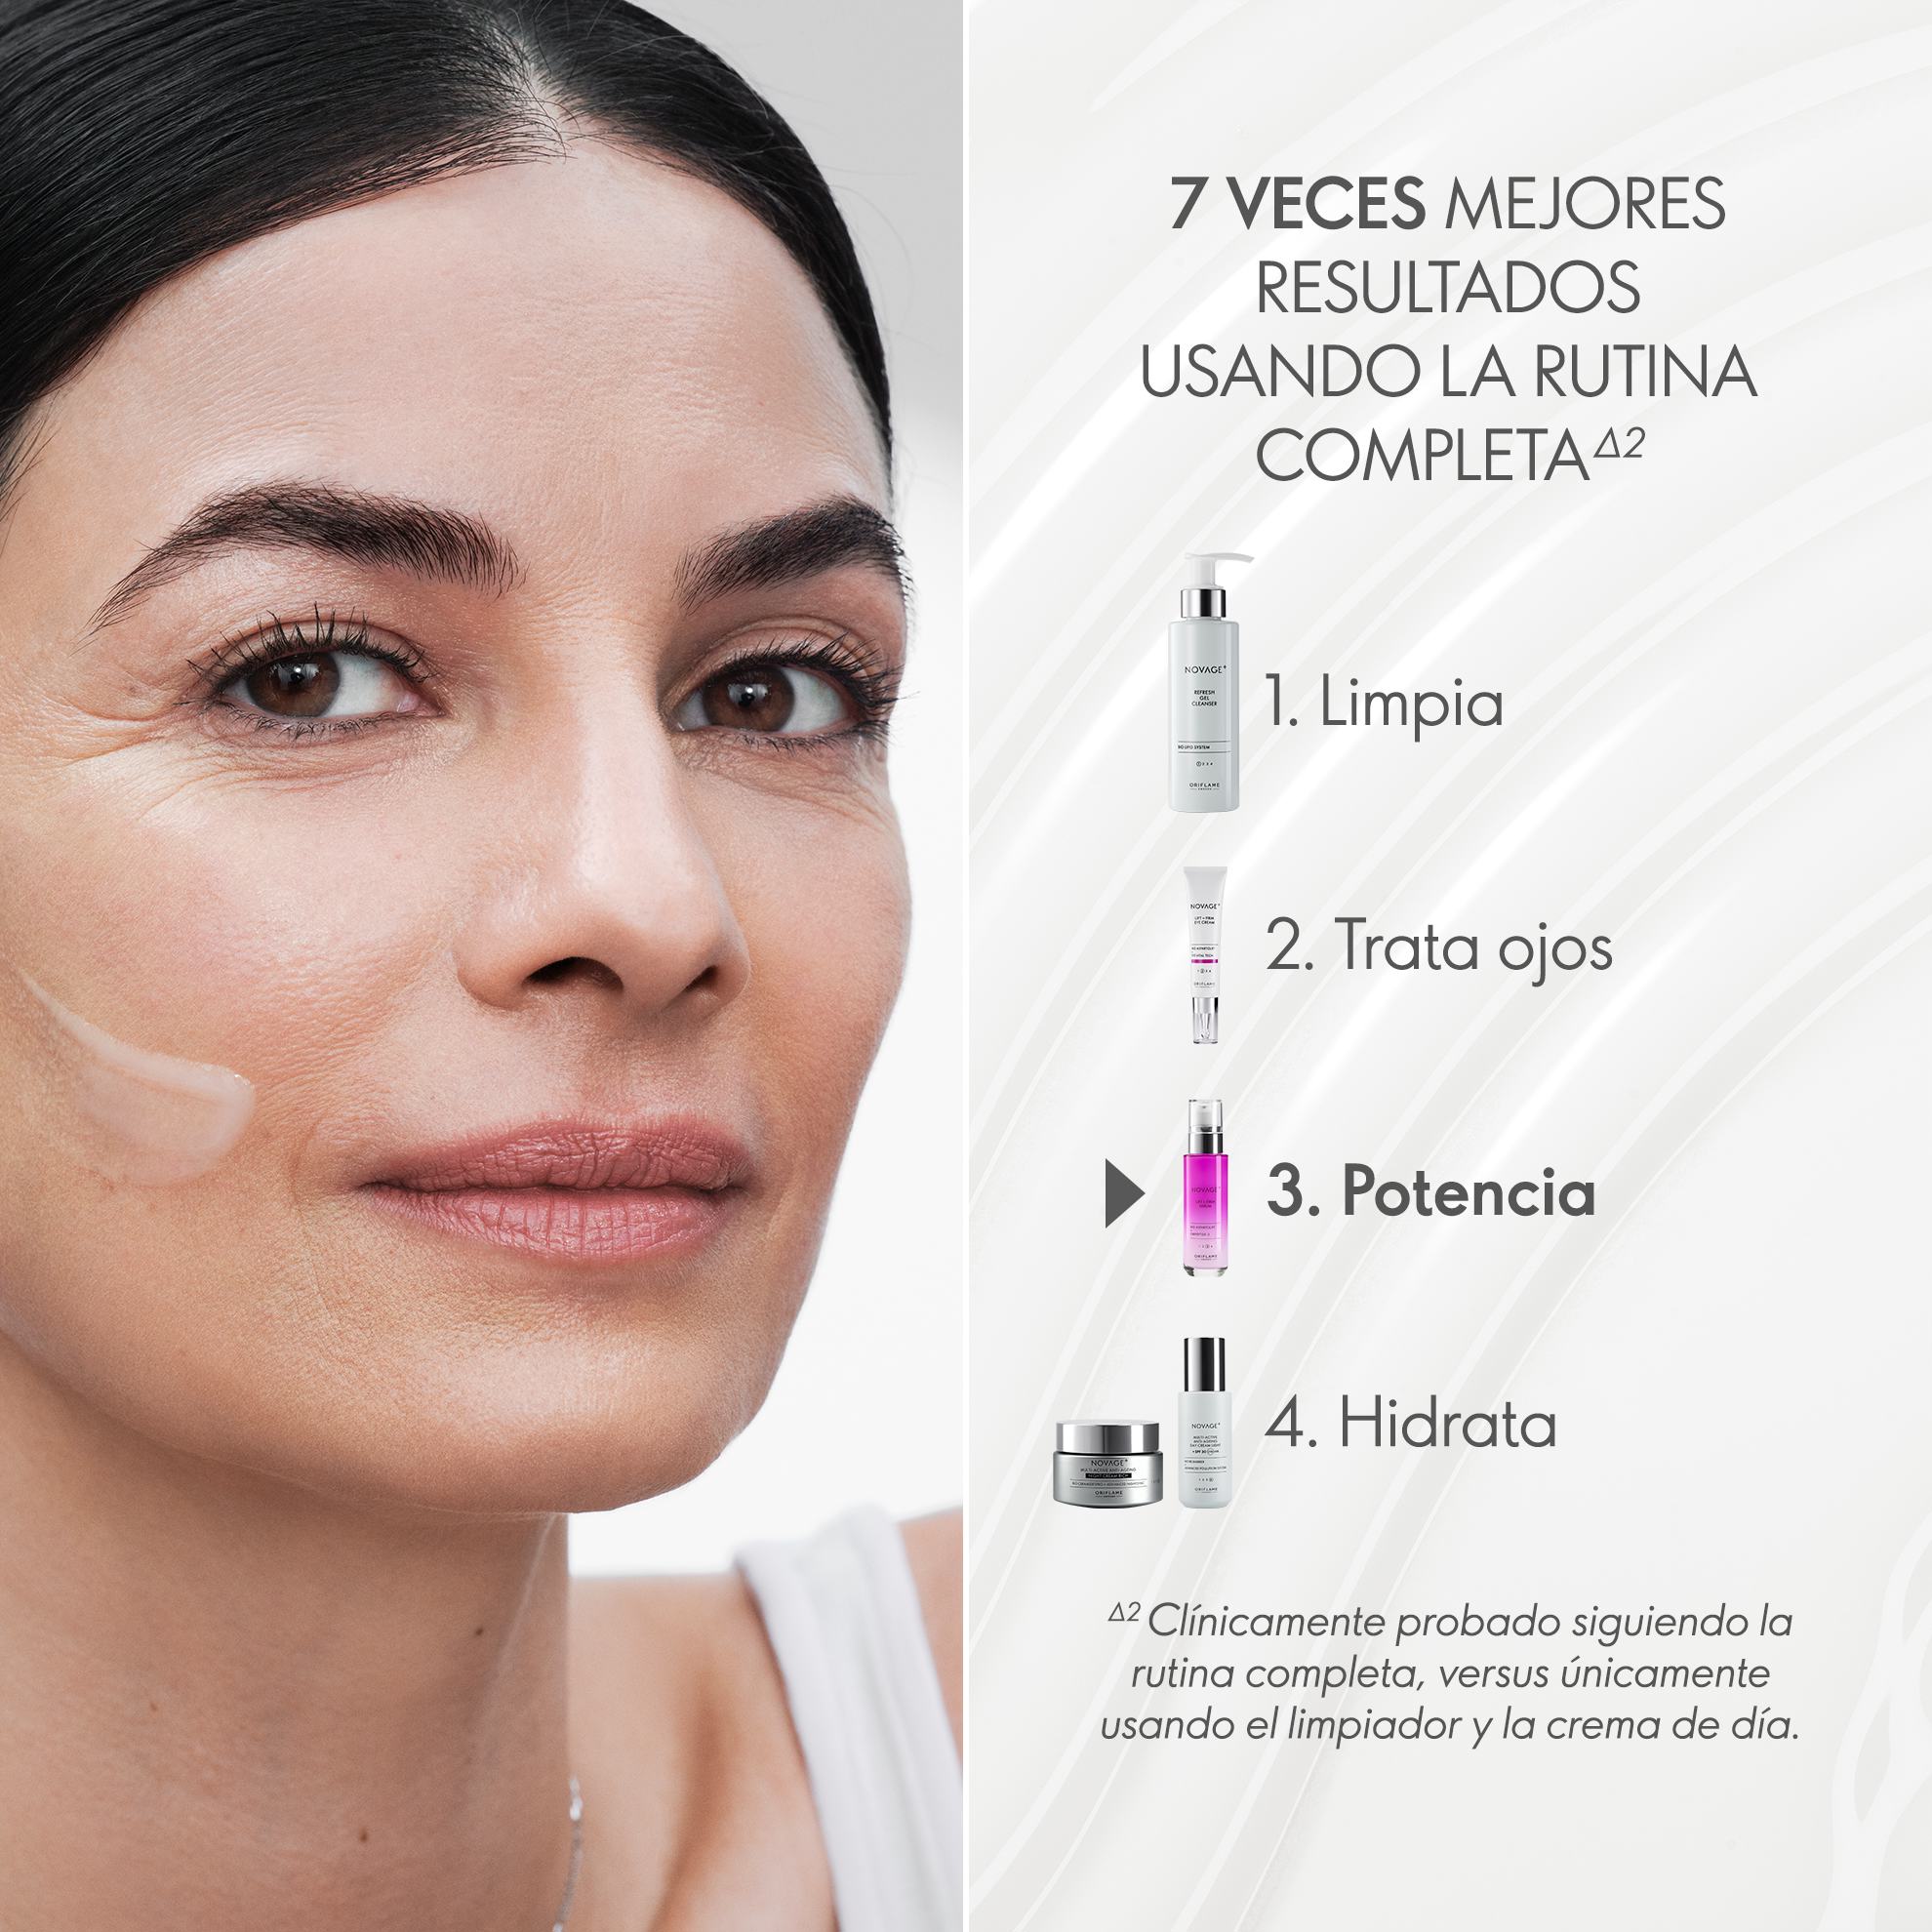 https://media-cdn.oriflame.com/productImage?externalMediaId=product-management-media%2fProducts%2f41037%2fPE%2f41037_5.png&id=18234936&version=1